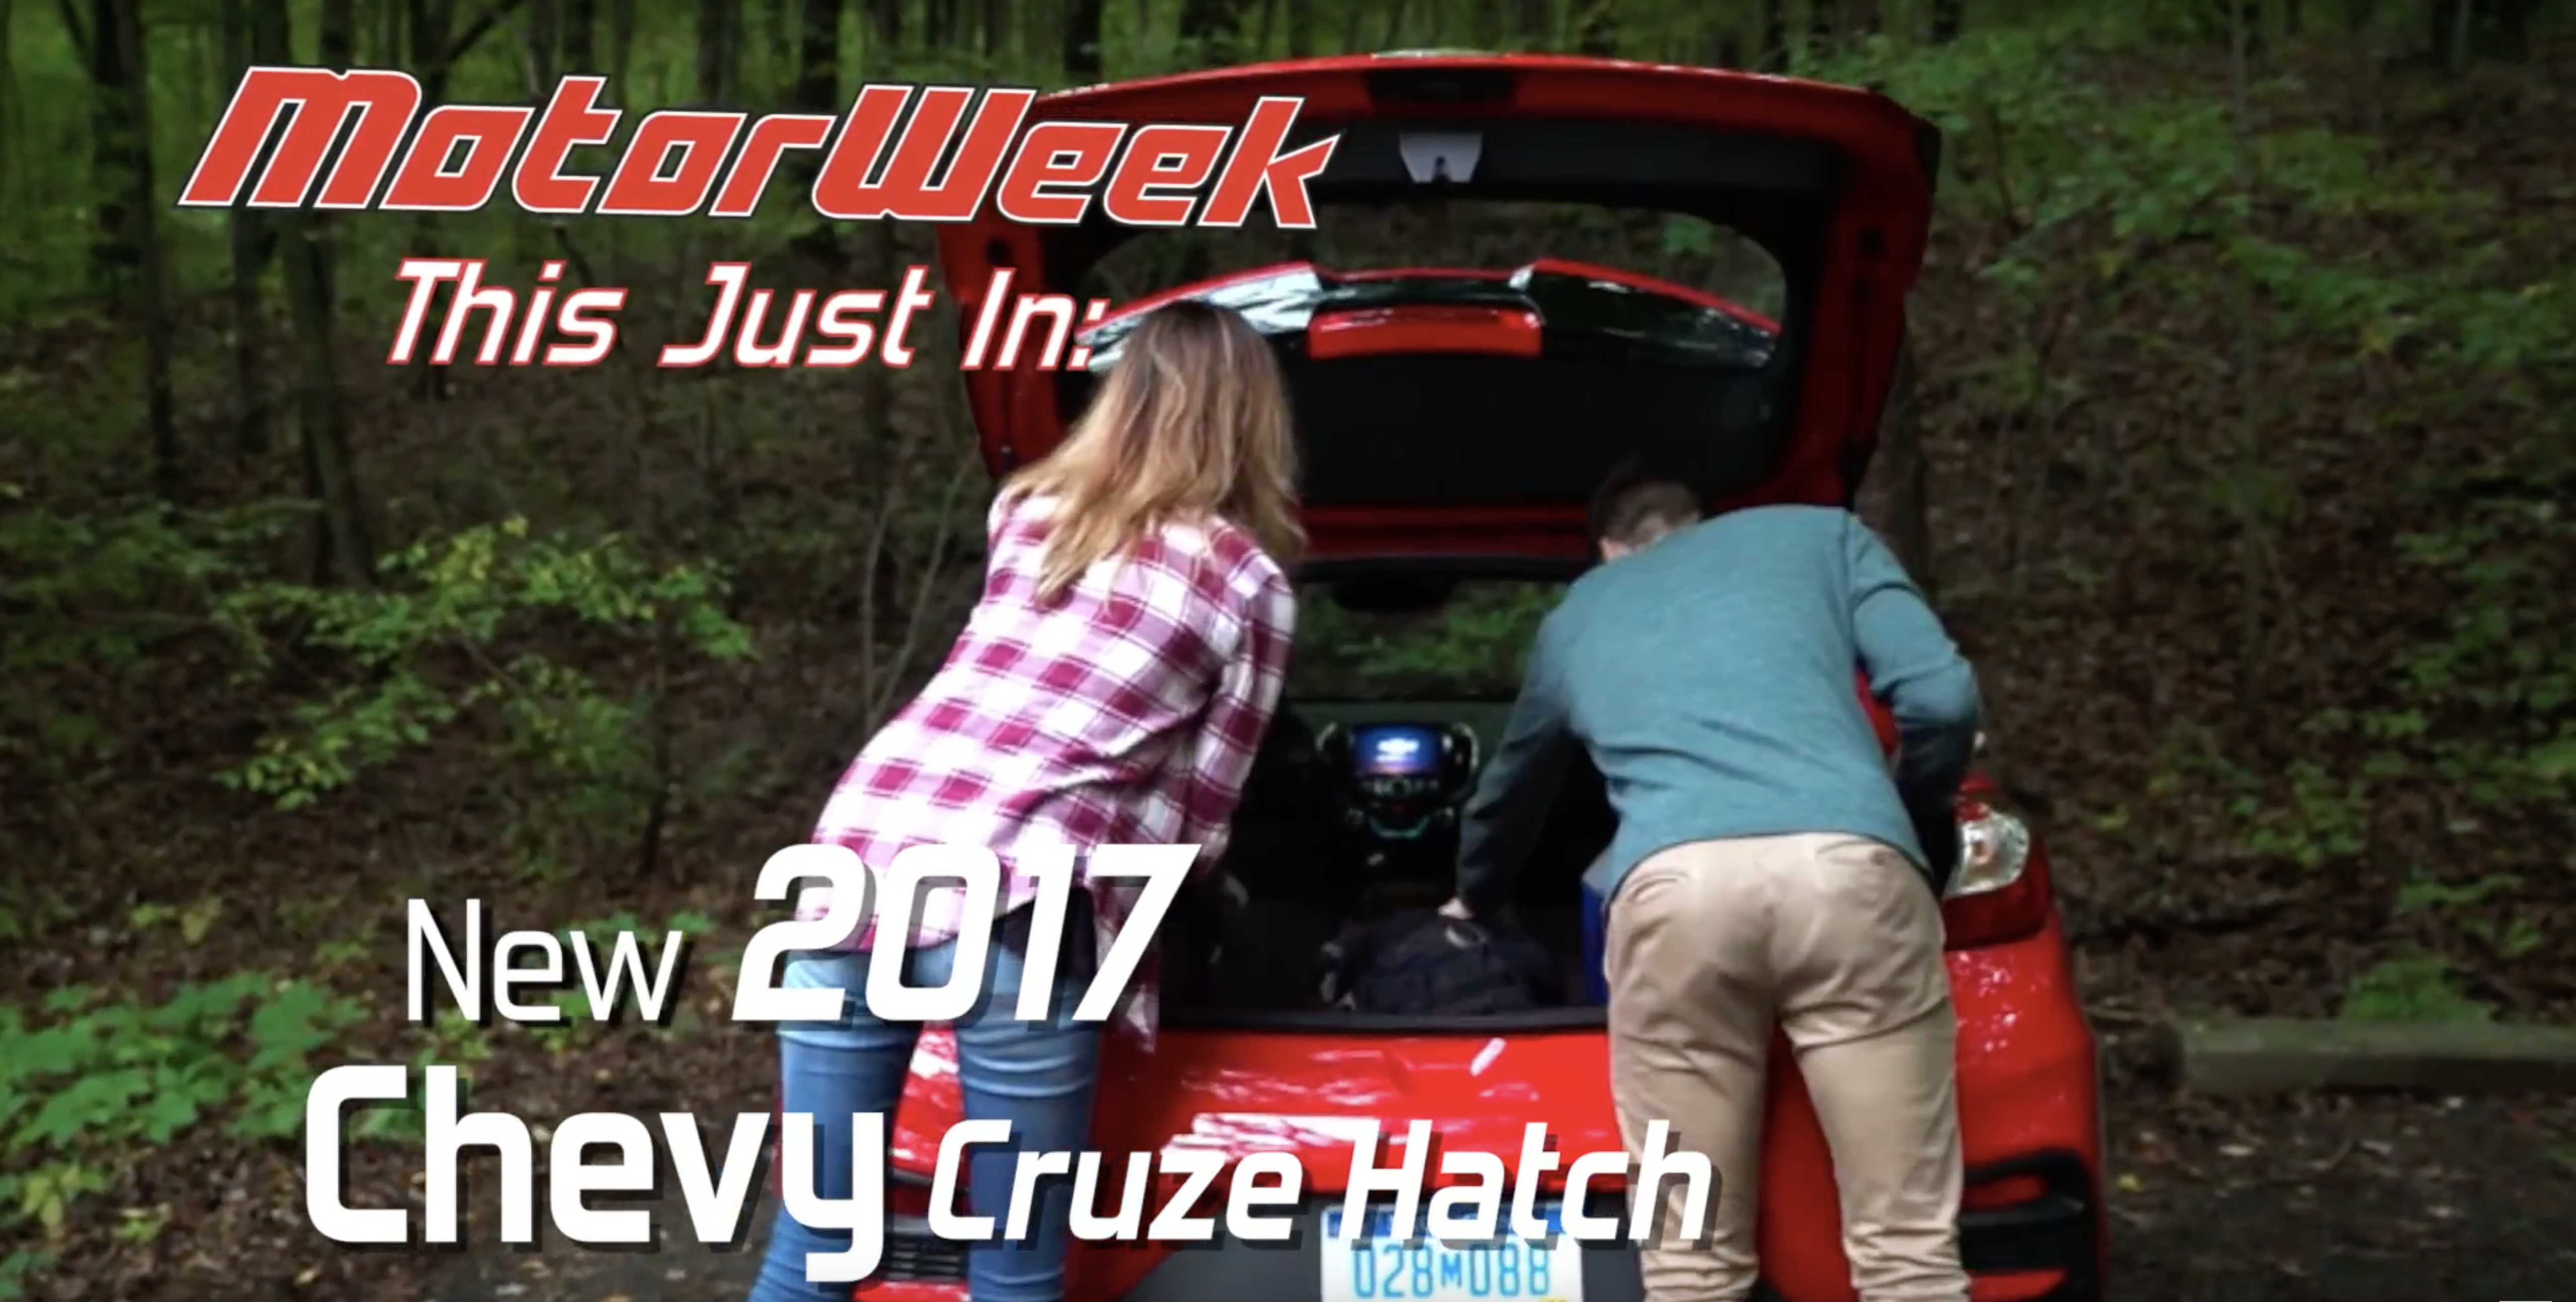 2017 Chevrolet Cruze Hatch DRIVEN! Storage space to rival other hatches, diesel coming! (VIDEO)